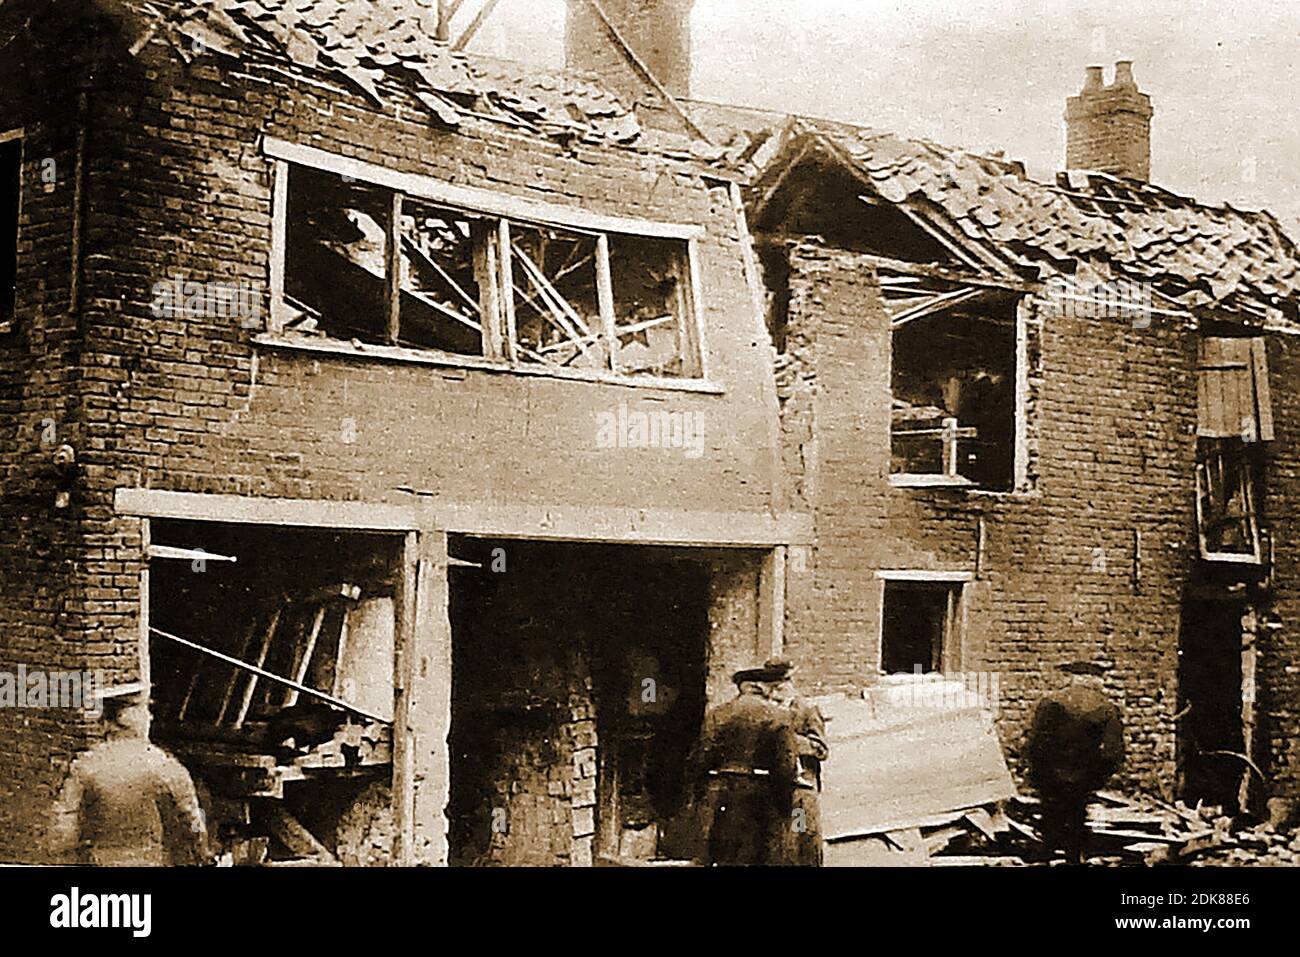 Bomb damage in Britain after the first attack by German Planes on Britain in the First World War.  The main campaign against Britain started in January 1915 using airships . The German Navy and Army Luftstreitkräfte mounted over 50  'zeppelin' bombing raids on the United Kingdom though both Zeppelin and Schütte-Lanz airships were used. Stock Photo